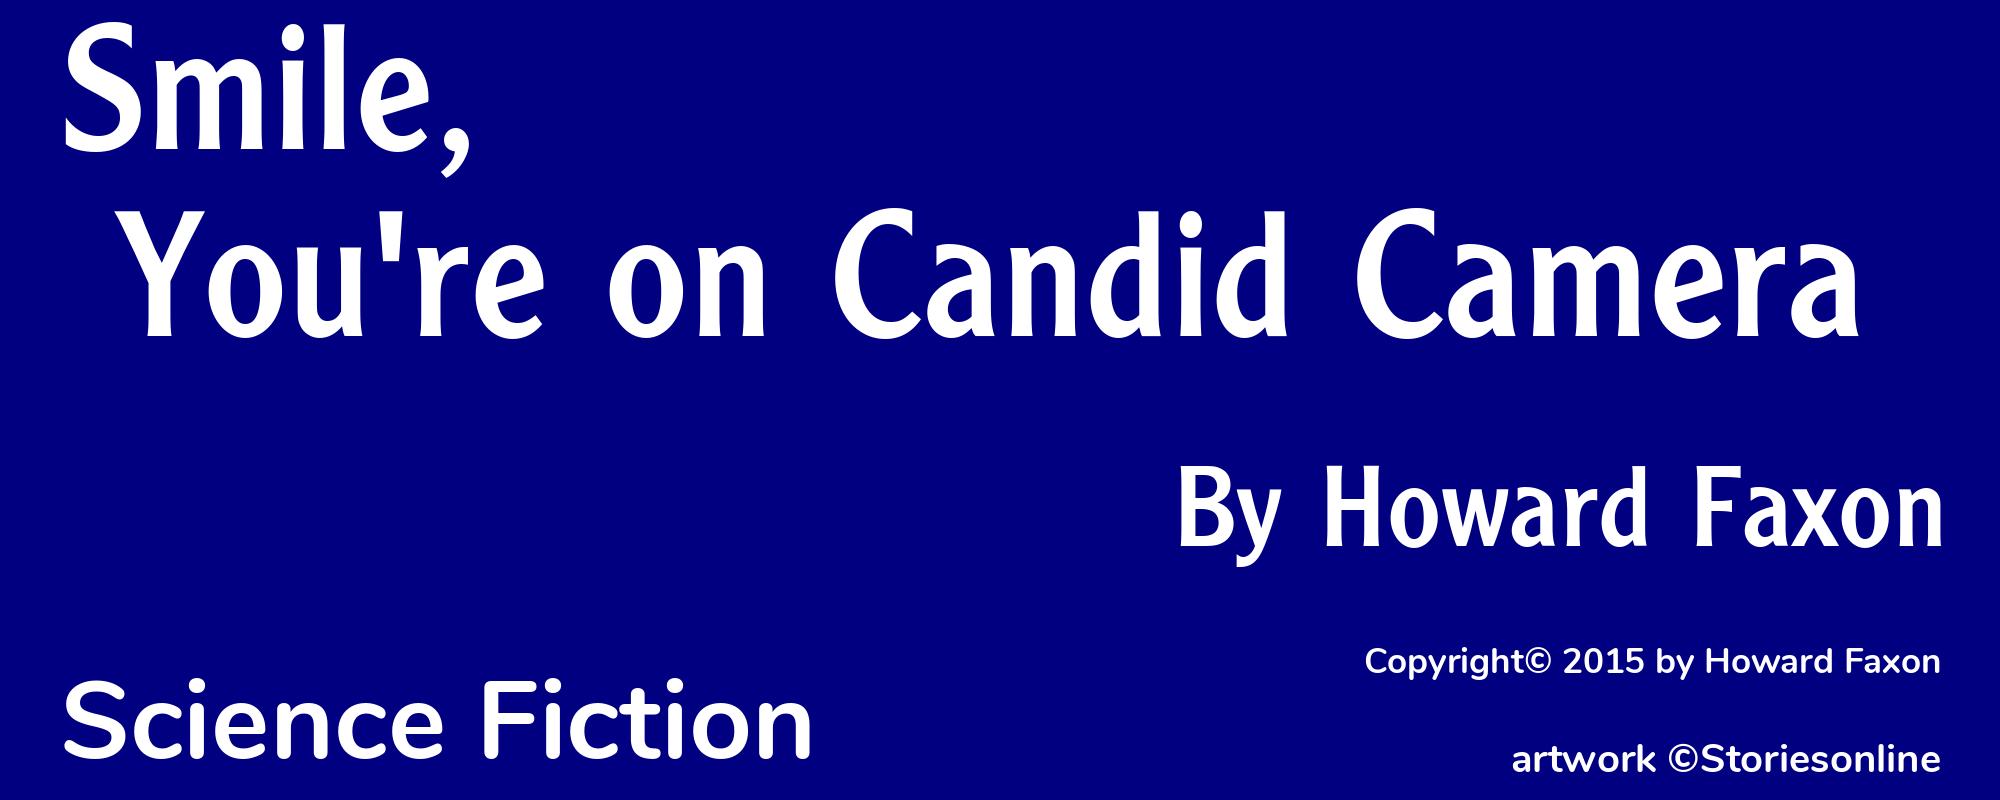 Smile, You're on Candid Camera - Cover